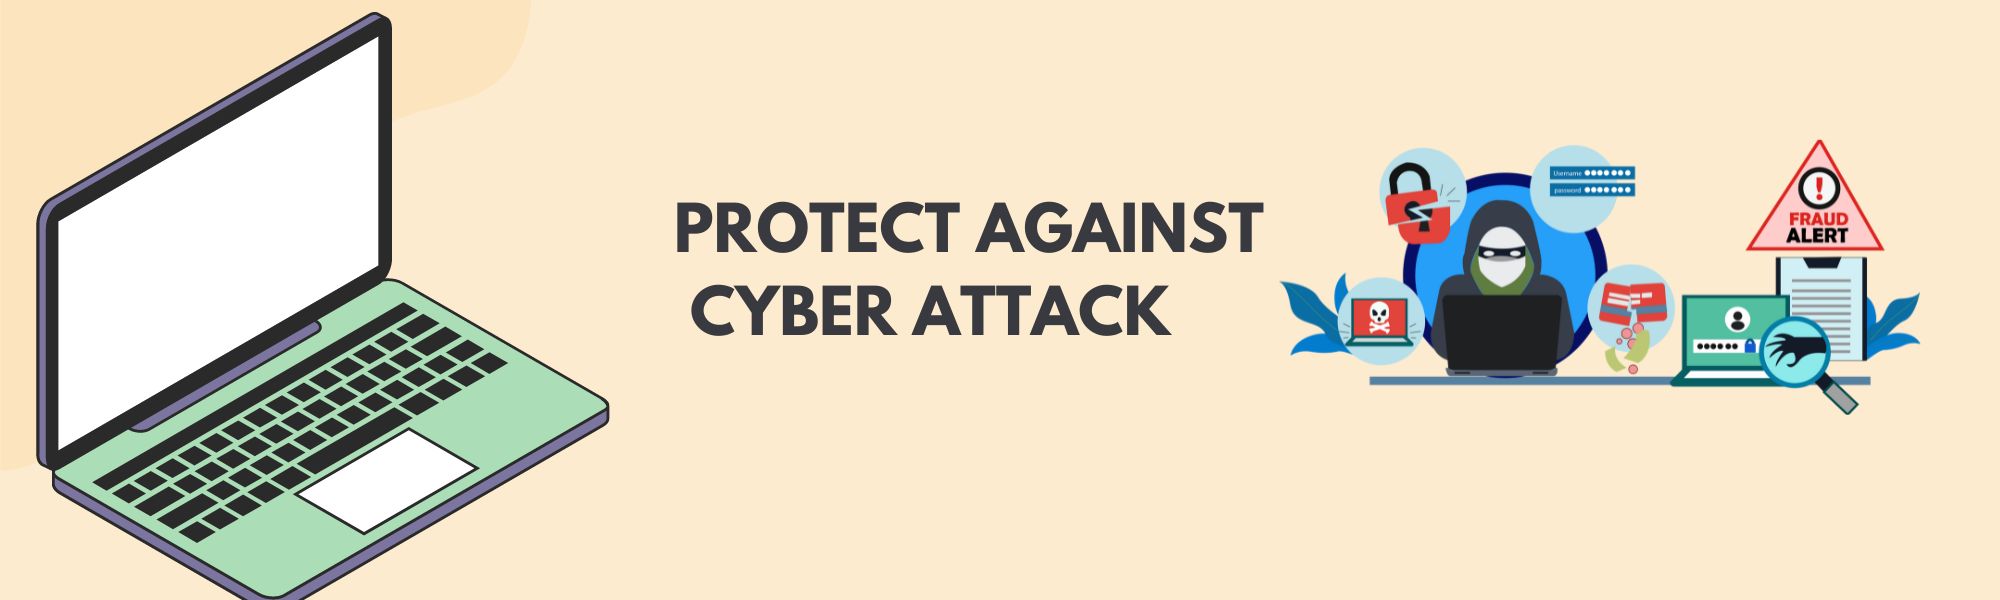 protect against cyberattack